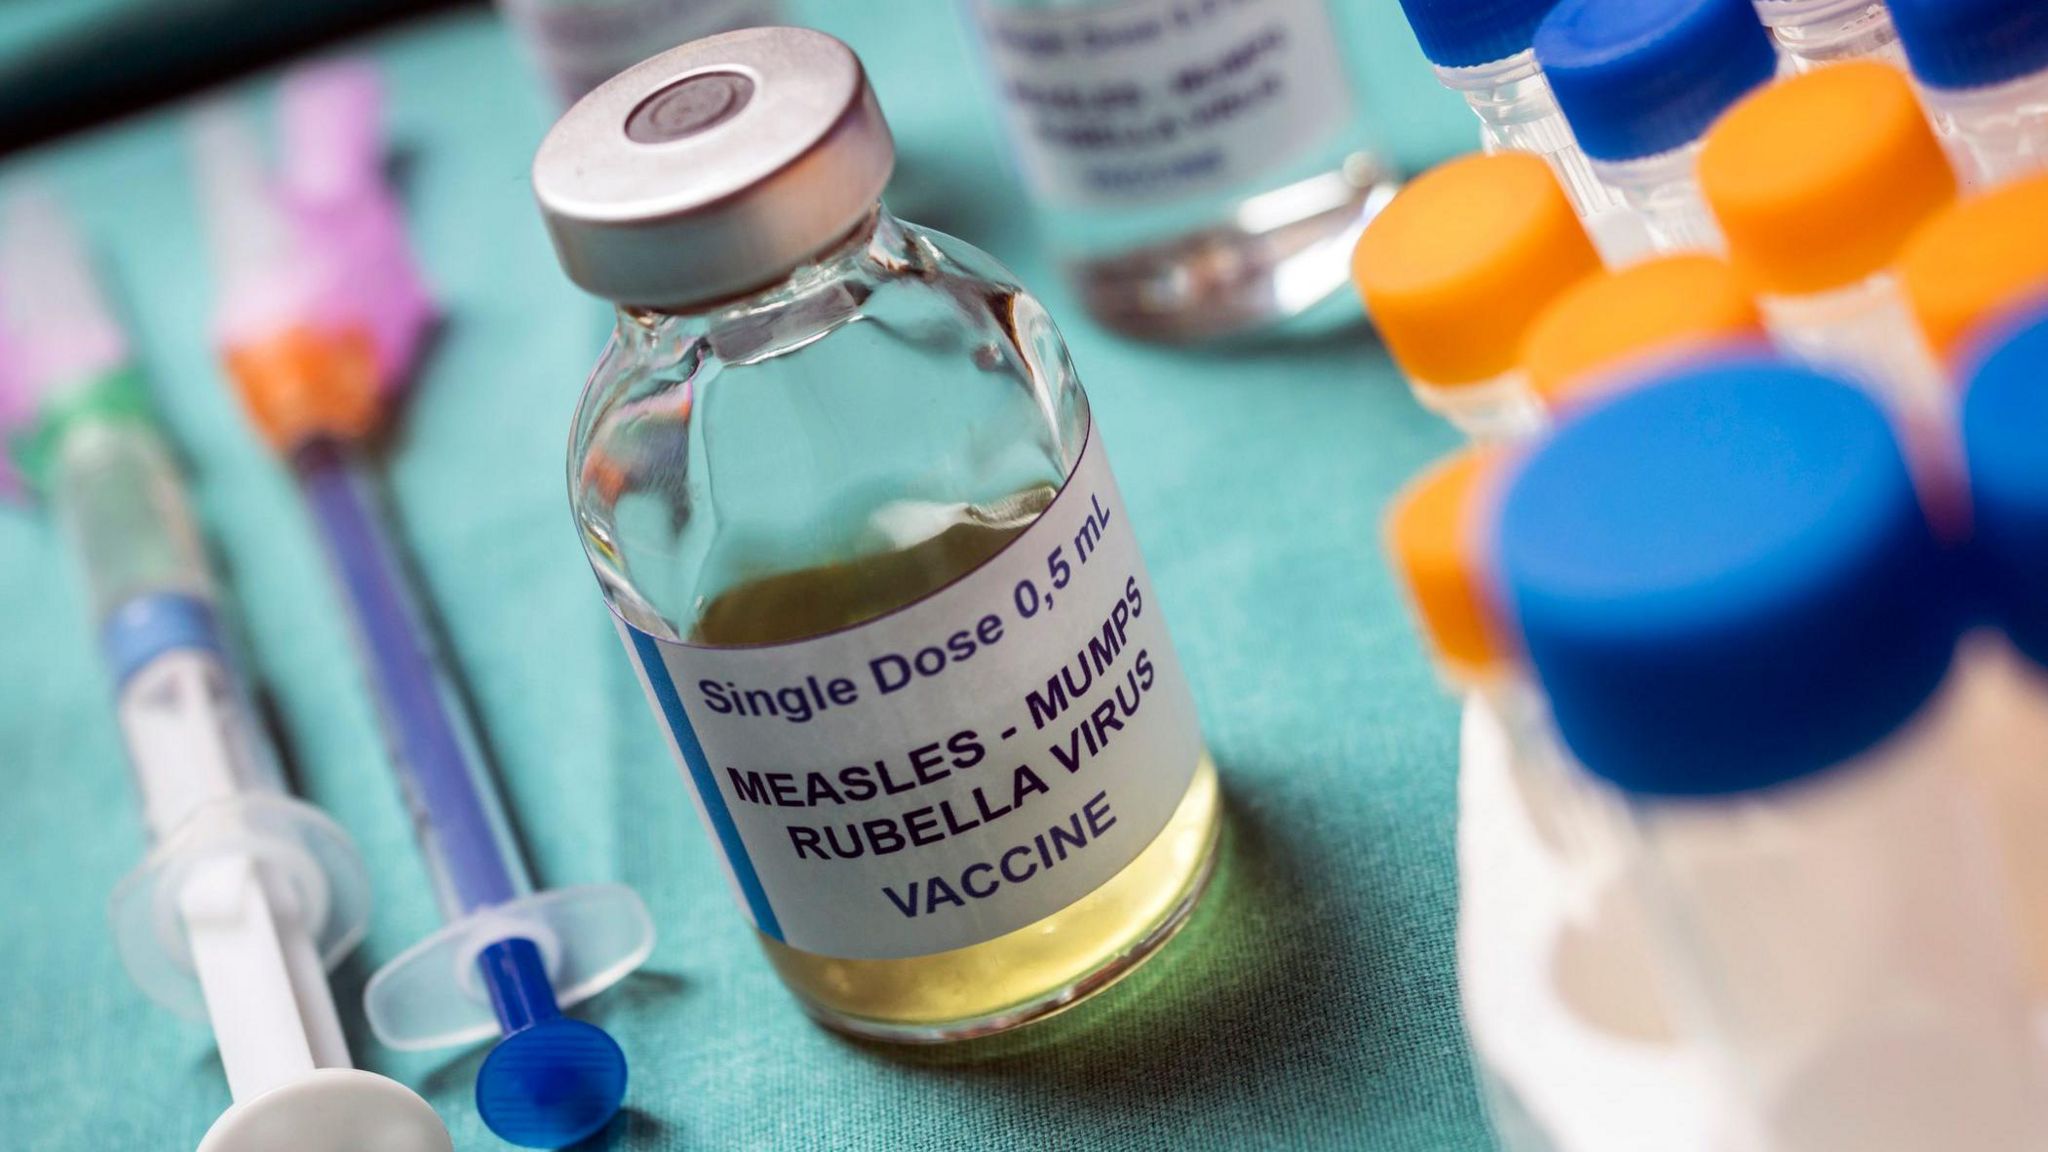 A vile of measles mumps and rubella vaccine sat on a green cloth beside needles and other medical equipment